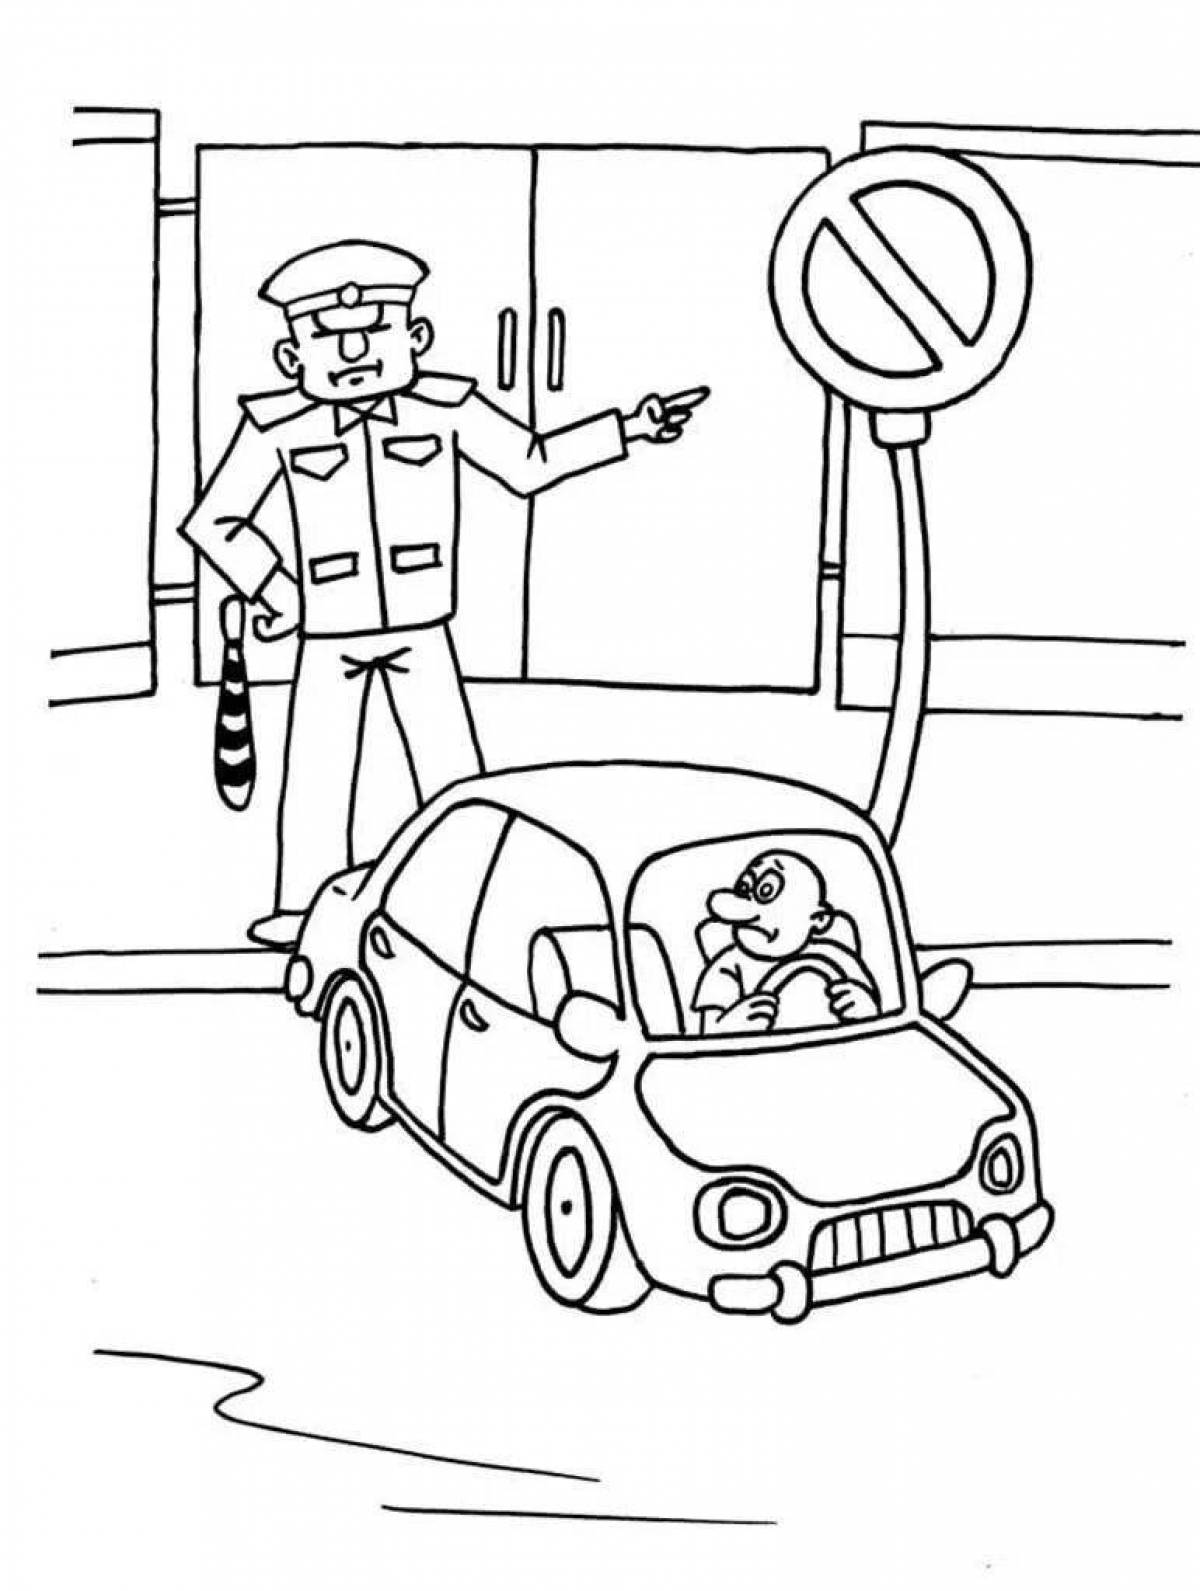 Attractive rules of the road vsht coloring book